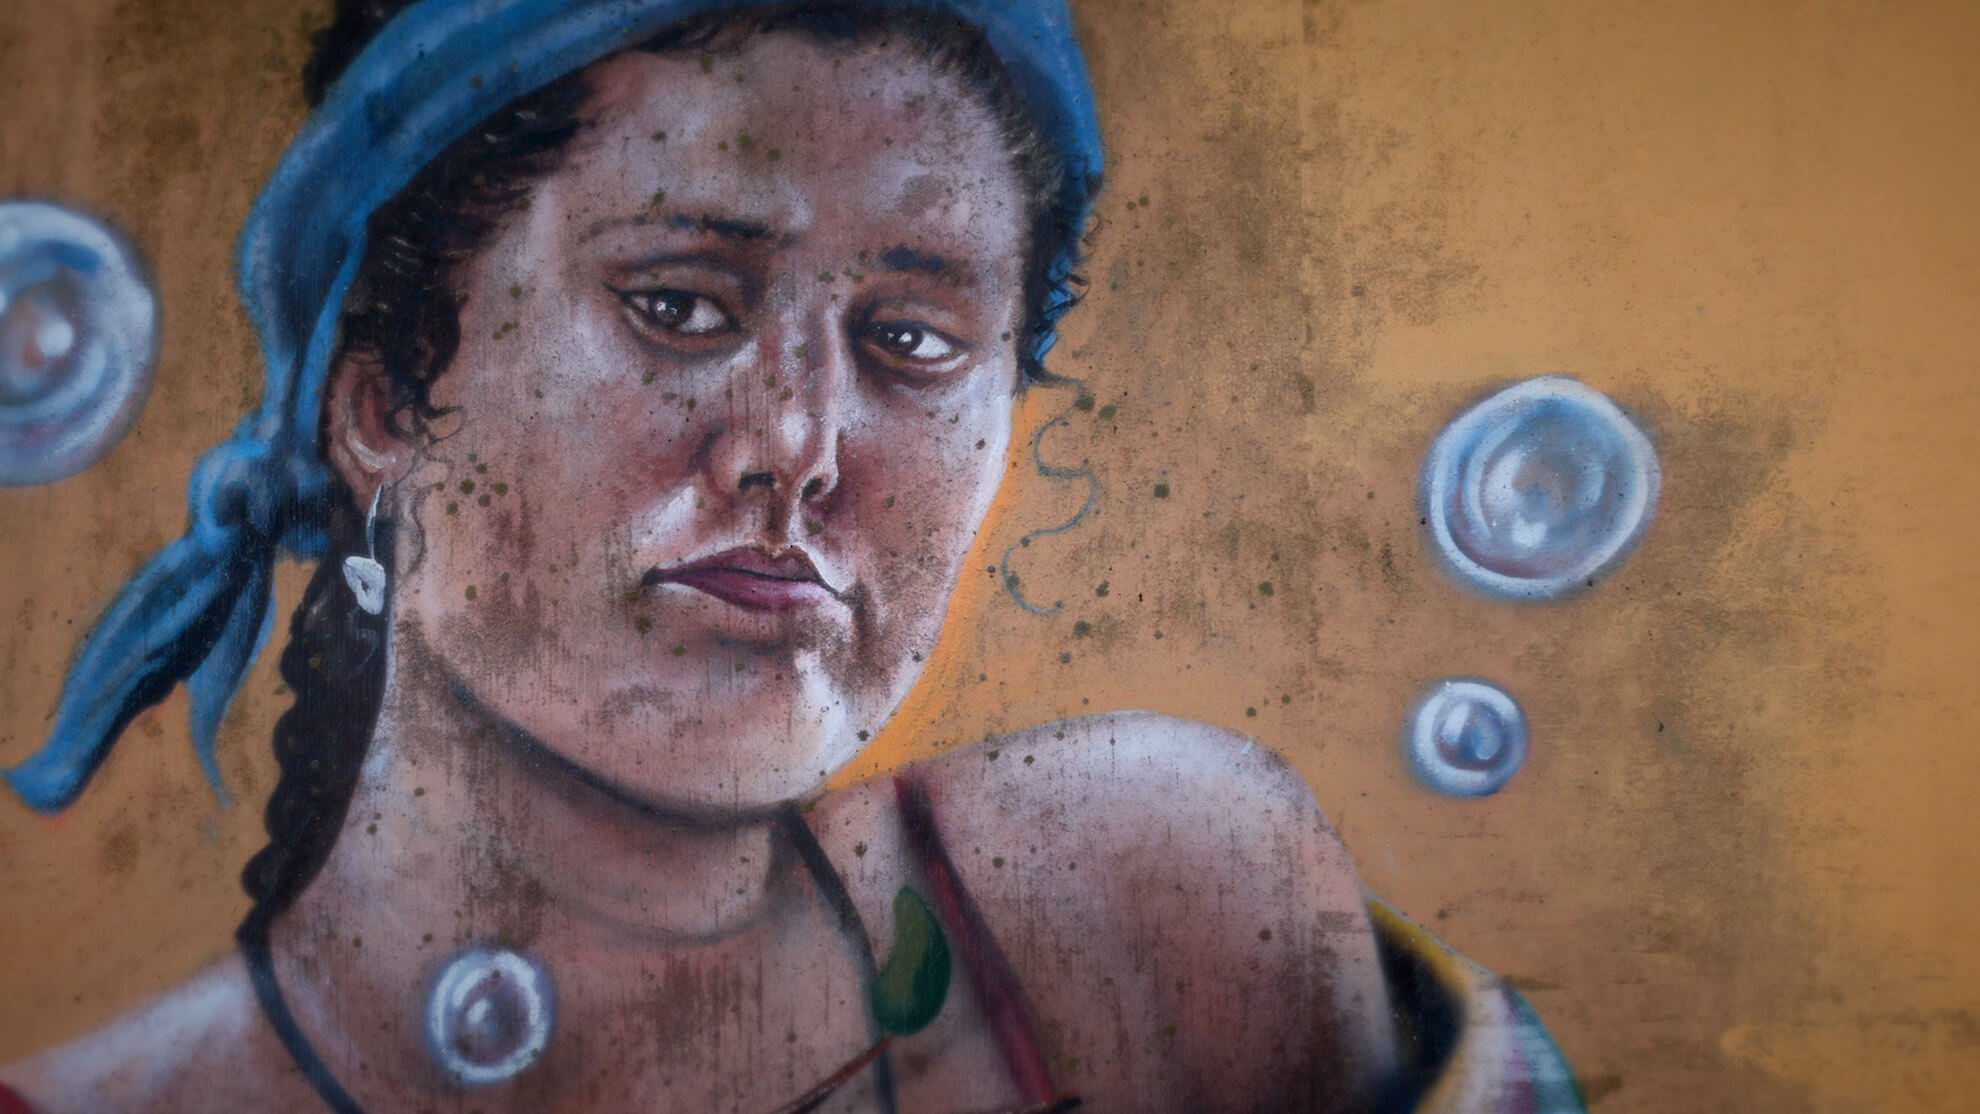 A close up of another part of the mural. A Black woman with a serious expression and wearing a blue tied headband is partially framed by bubbles on an ochre background.